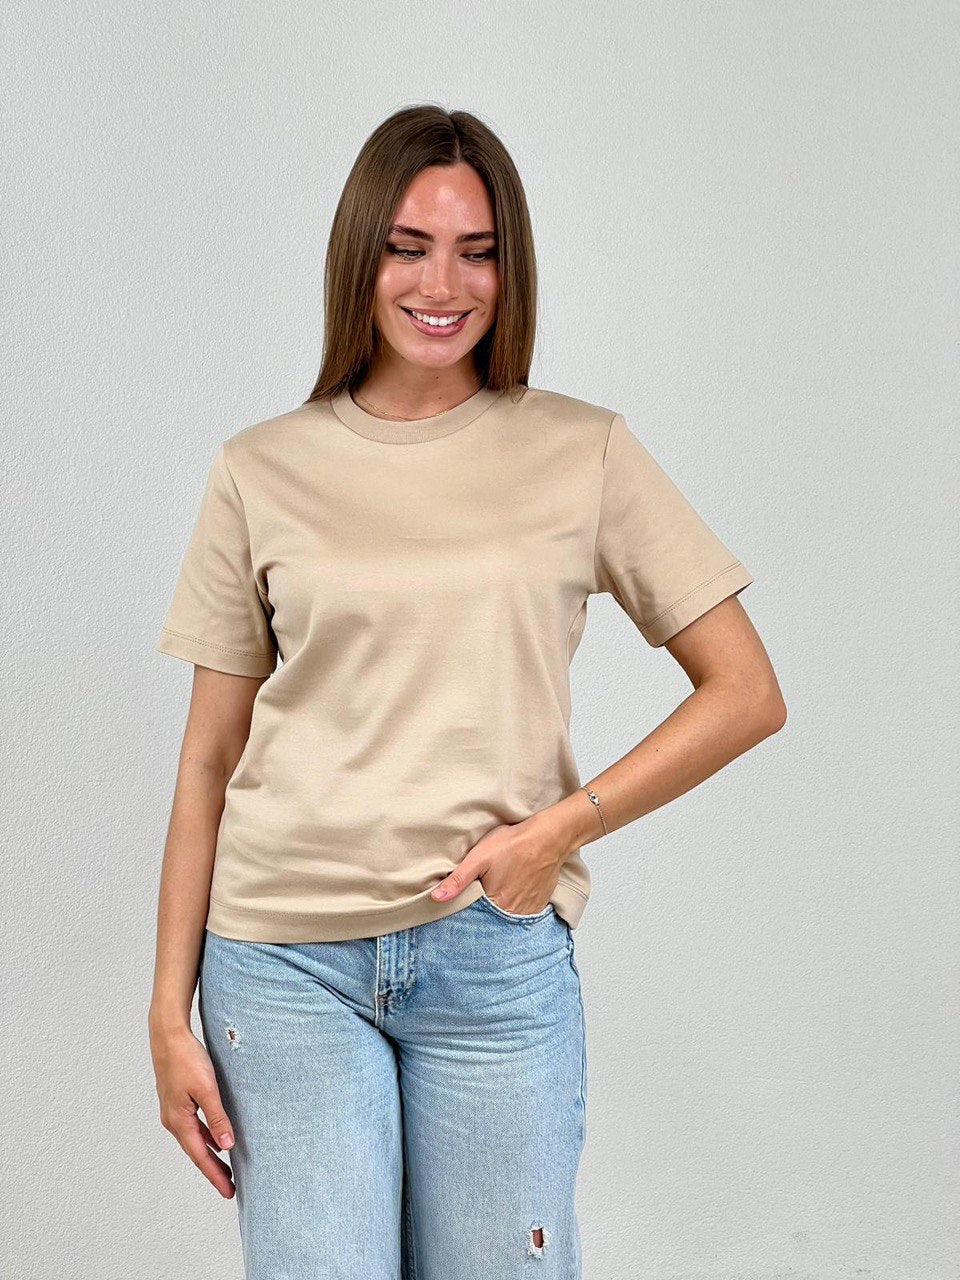 Upgrade your wardrobe with the Destello Blouse (12-16), crafted from 100% soft and breathable cotton. This stylish top offers a comfortable and flattering fit, perfect for any occasion. Add a touch of luxury to your look with the Destello Blouse!